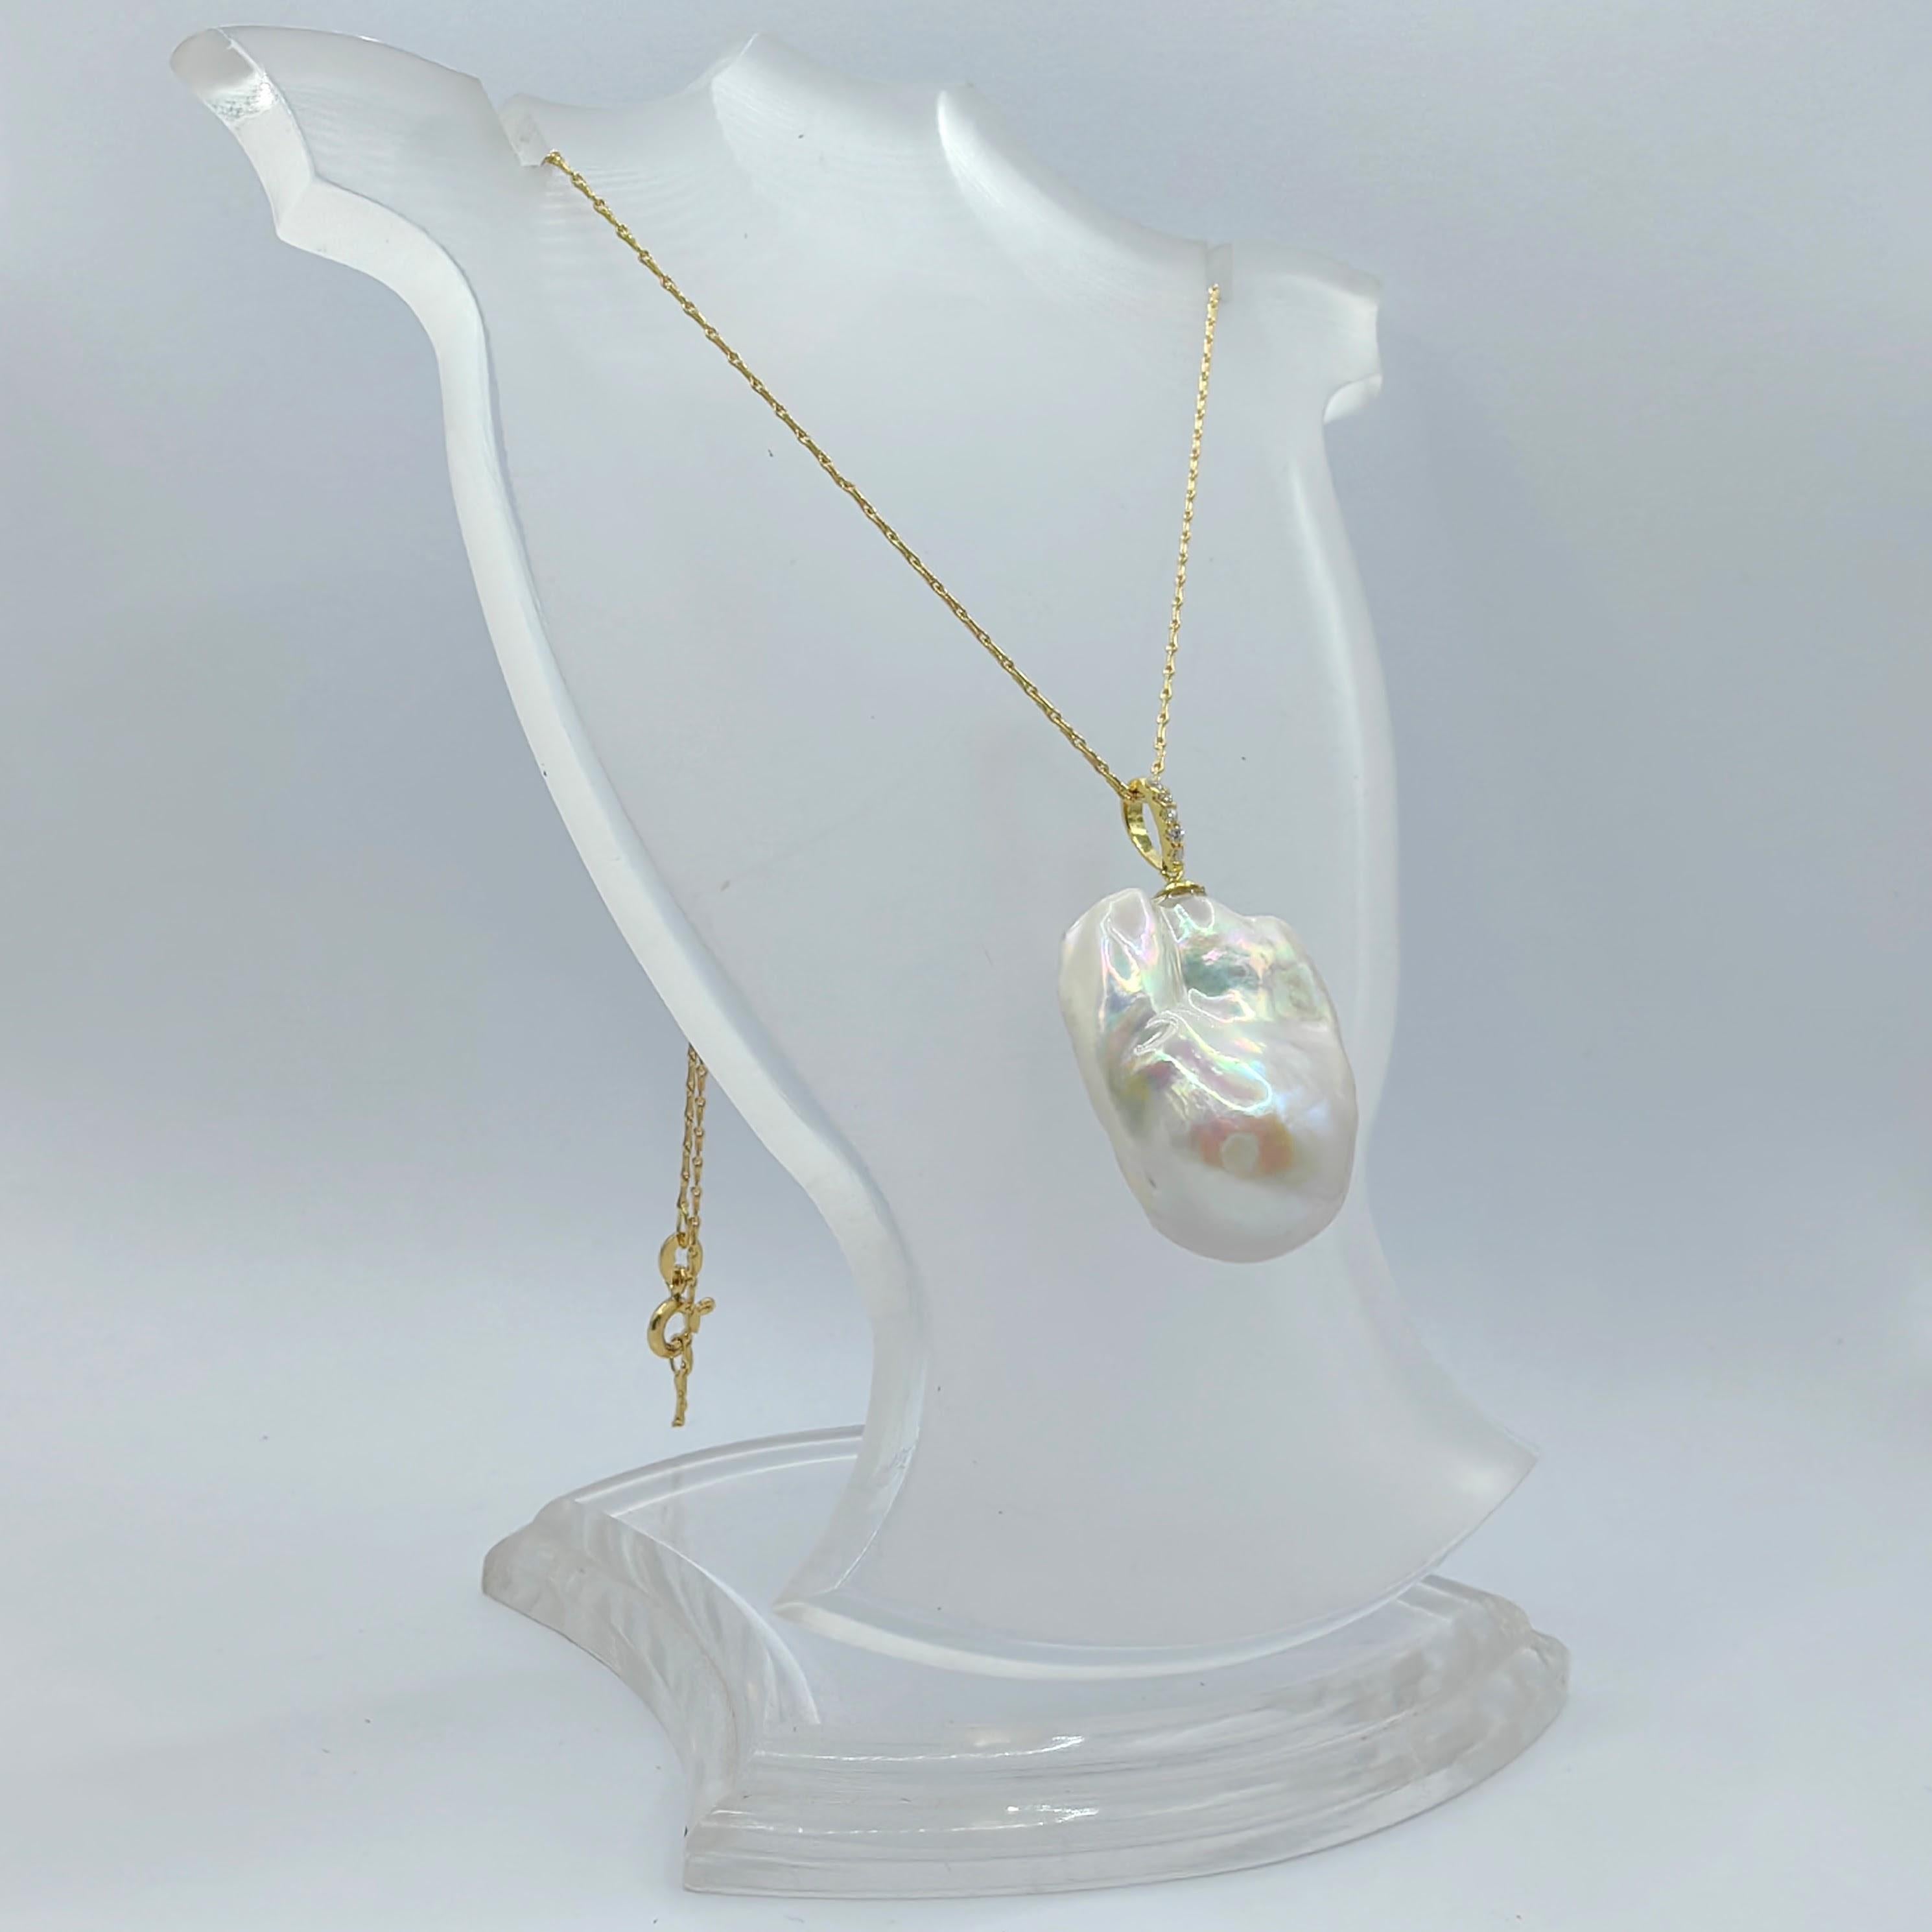 49.24ct Large Iridescent Baroque Pearl Diamond 18K Yellow Gold Necklace Pendant For Sale 4